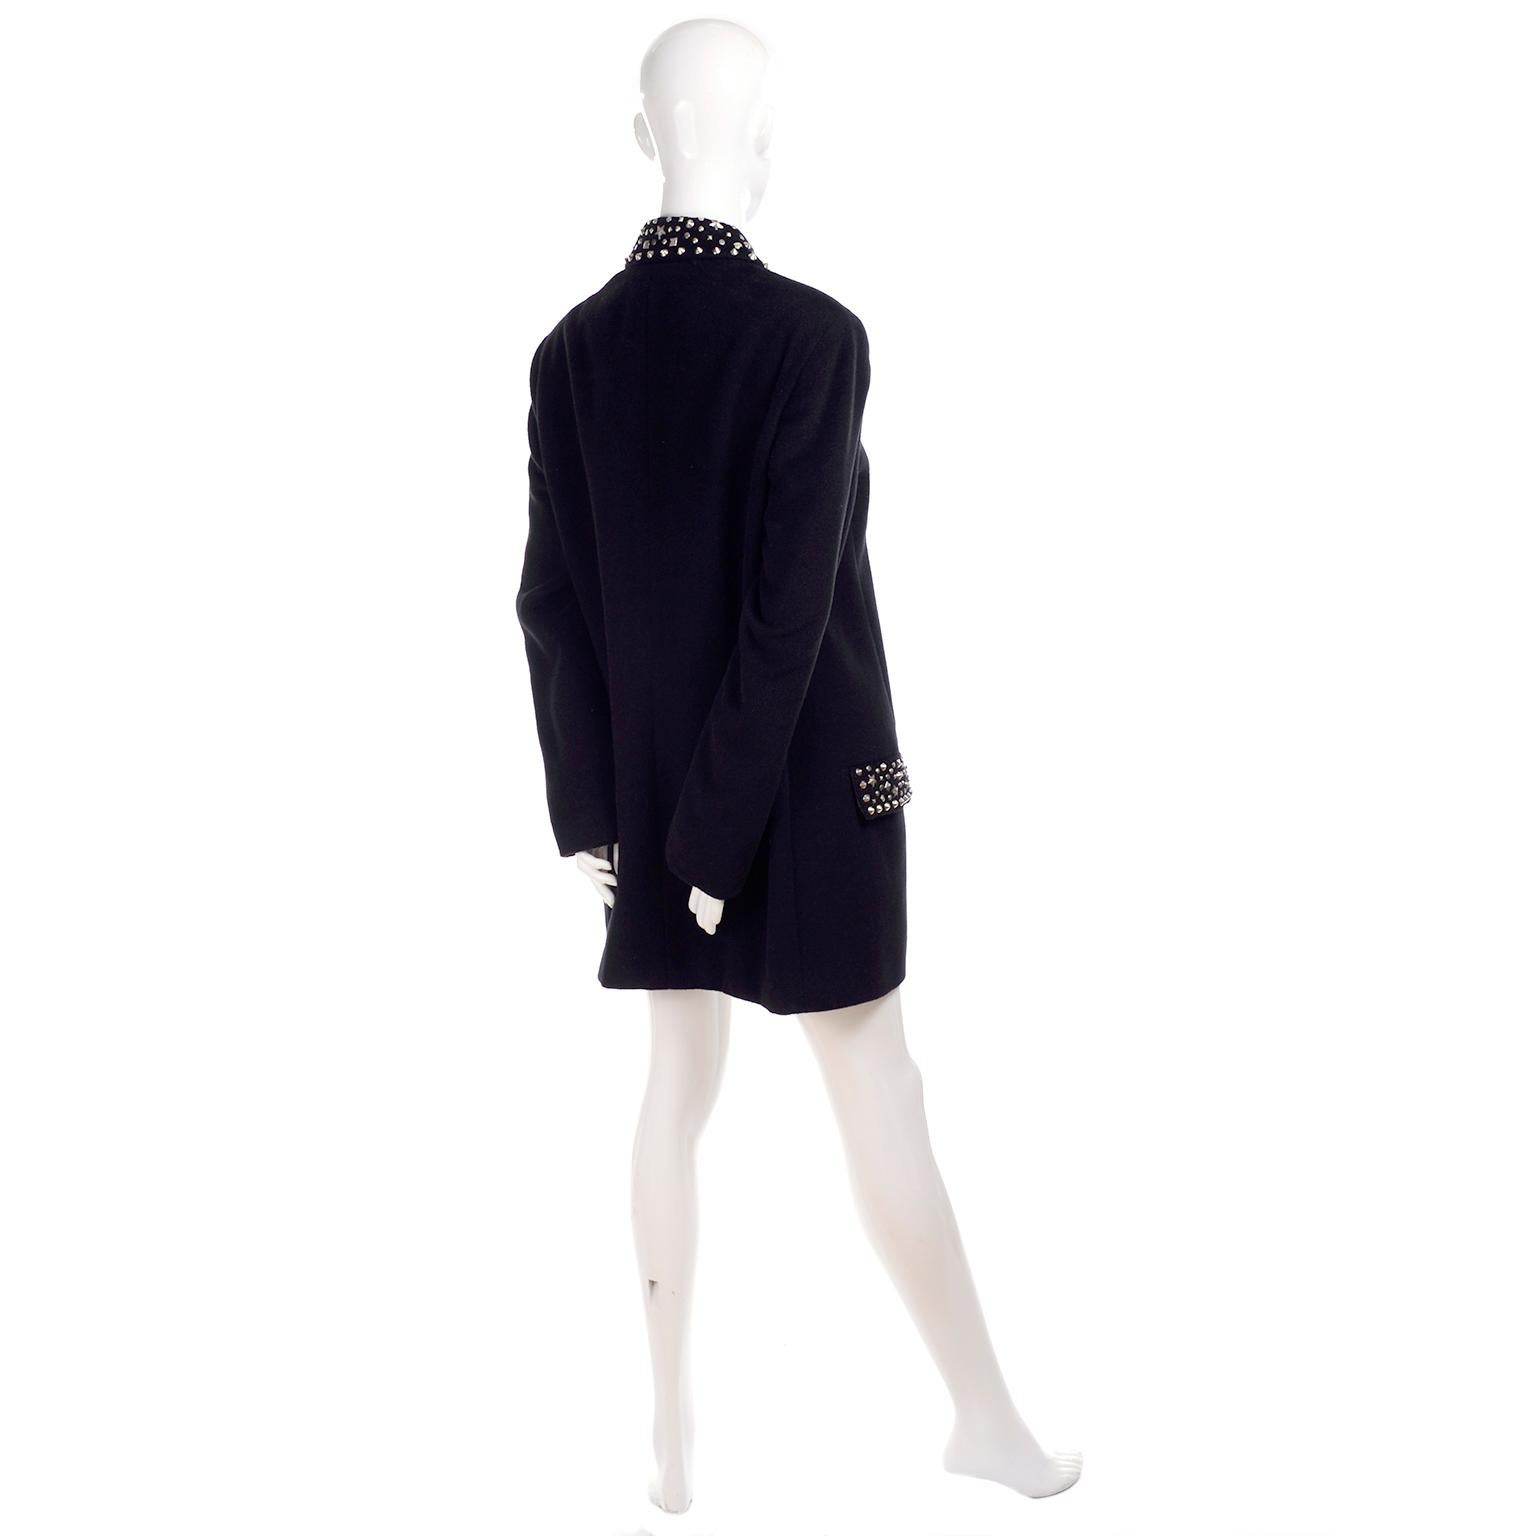 1990s Gianni Versace Couture Jacket in Wool Cashmere Blend w/ Medusa Head Studs 2